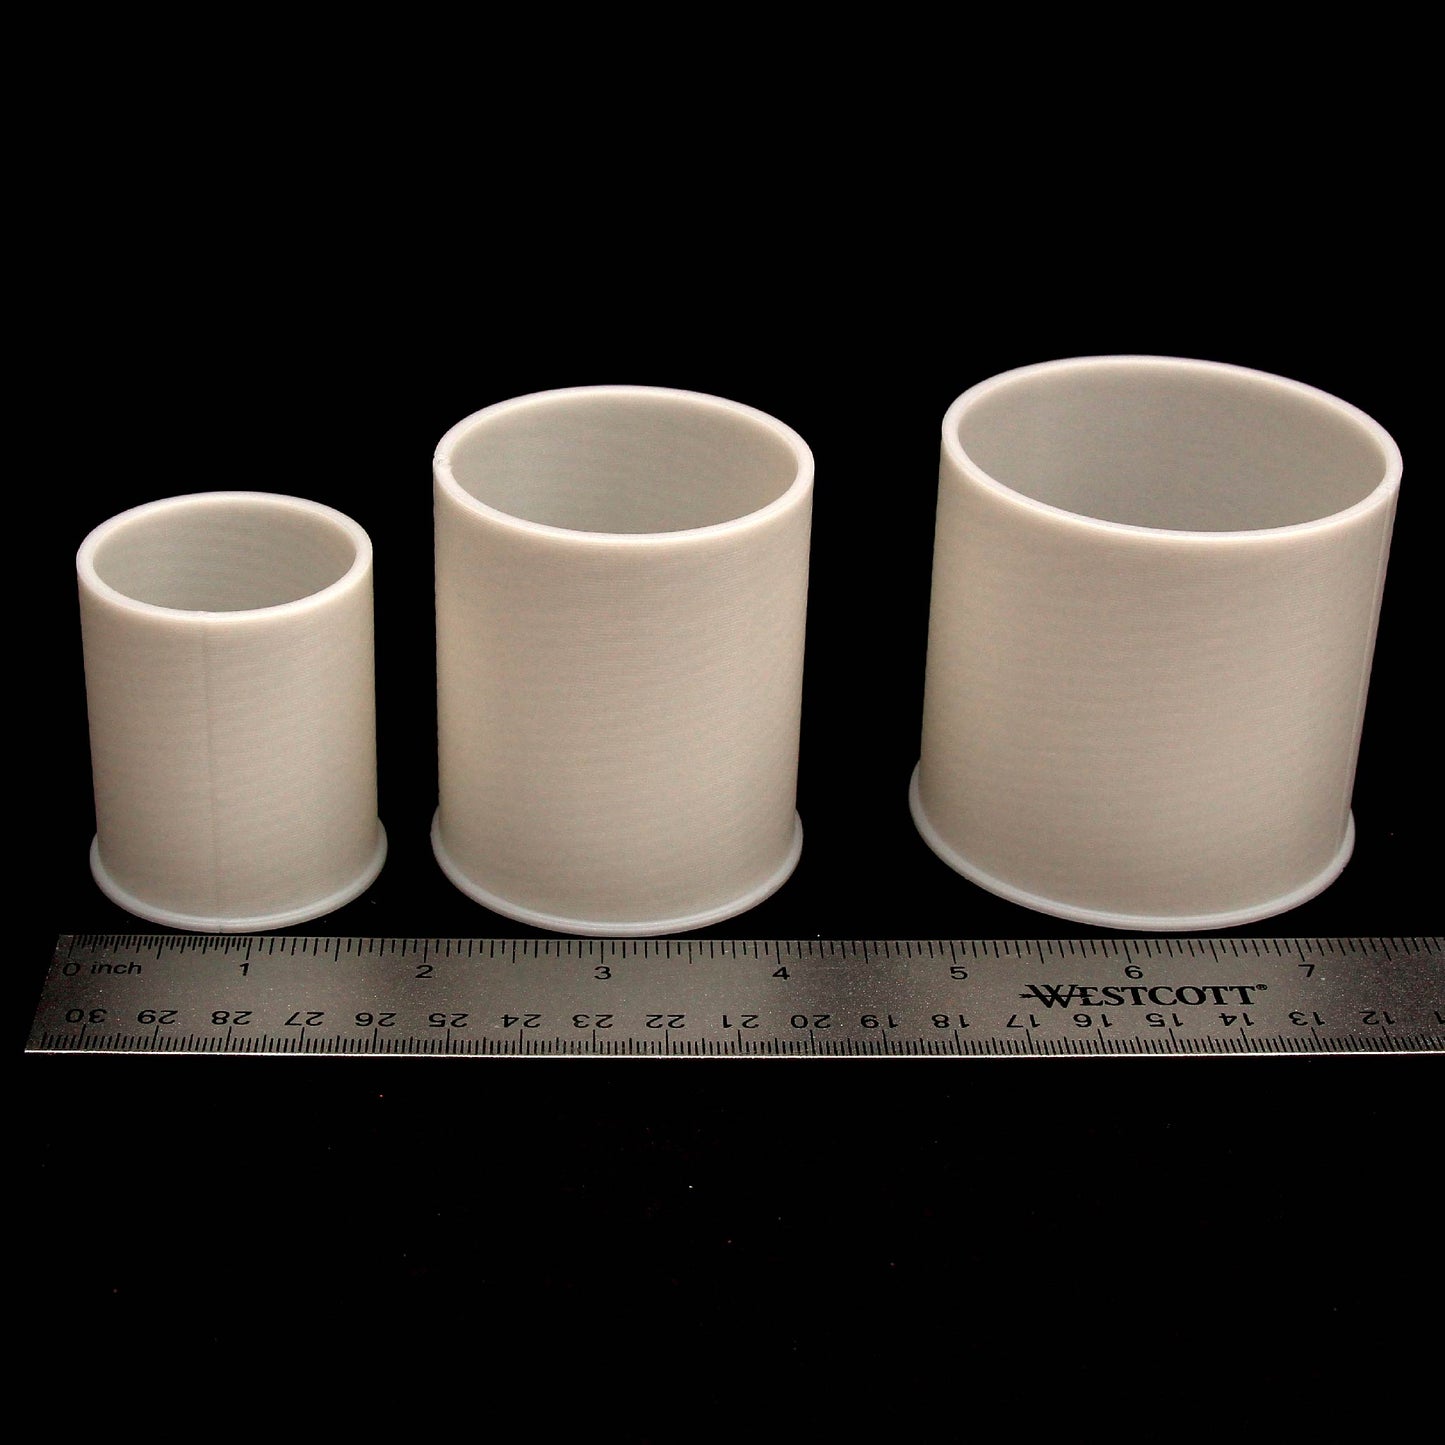 Wood Designs Paint Cups - Set of Eight